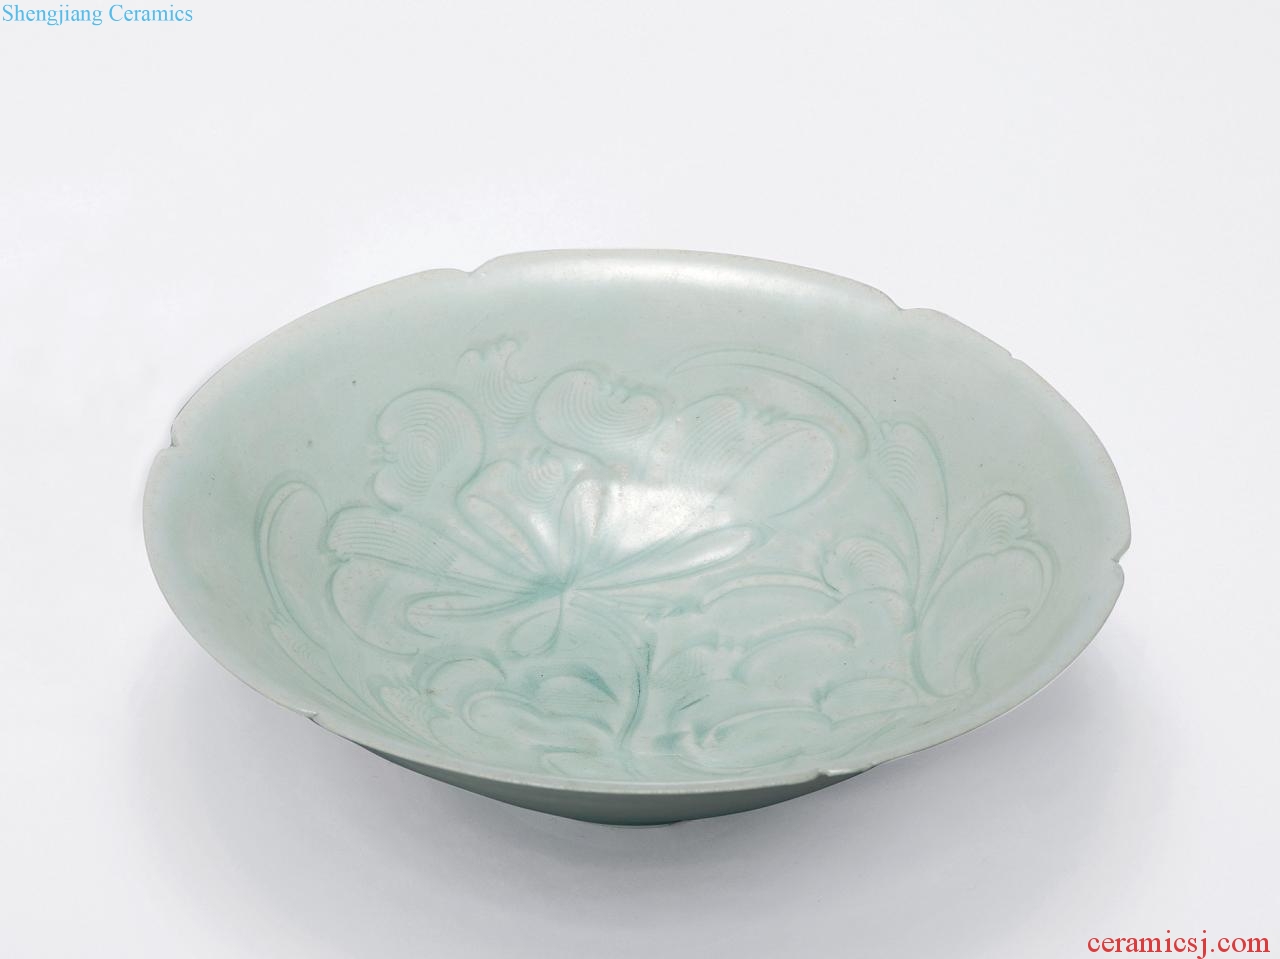 Song dynasty (960-1279), green white glazed score fold branch peony grains mouth shallow bowl